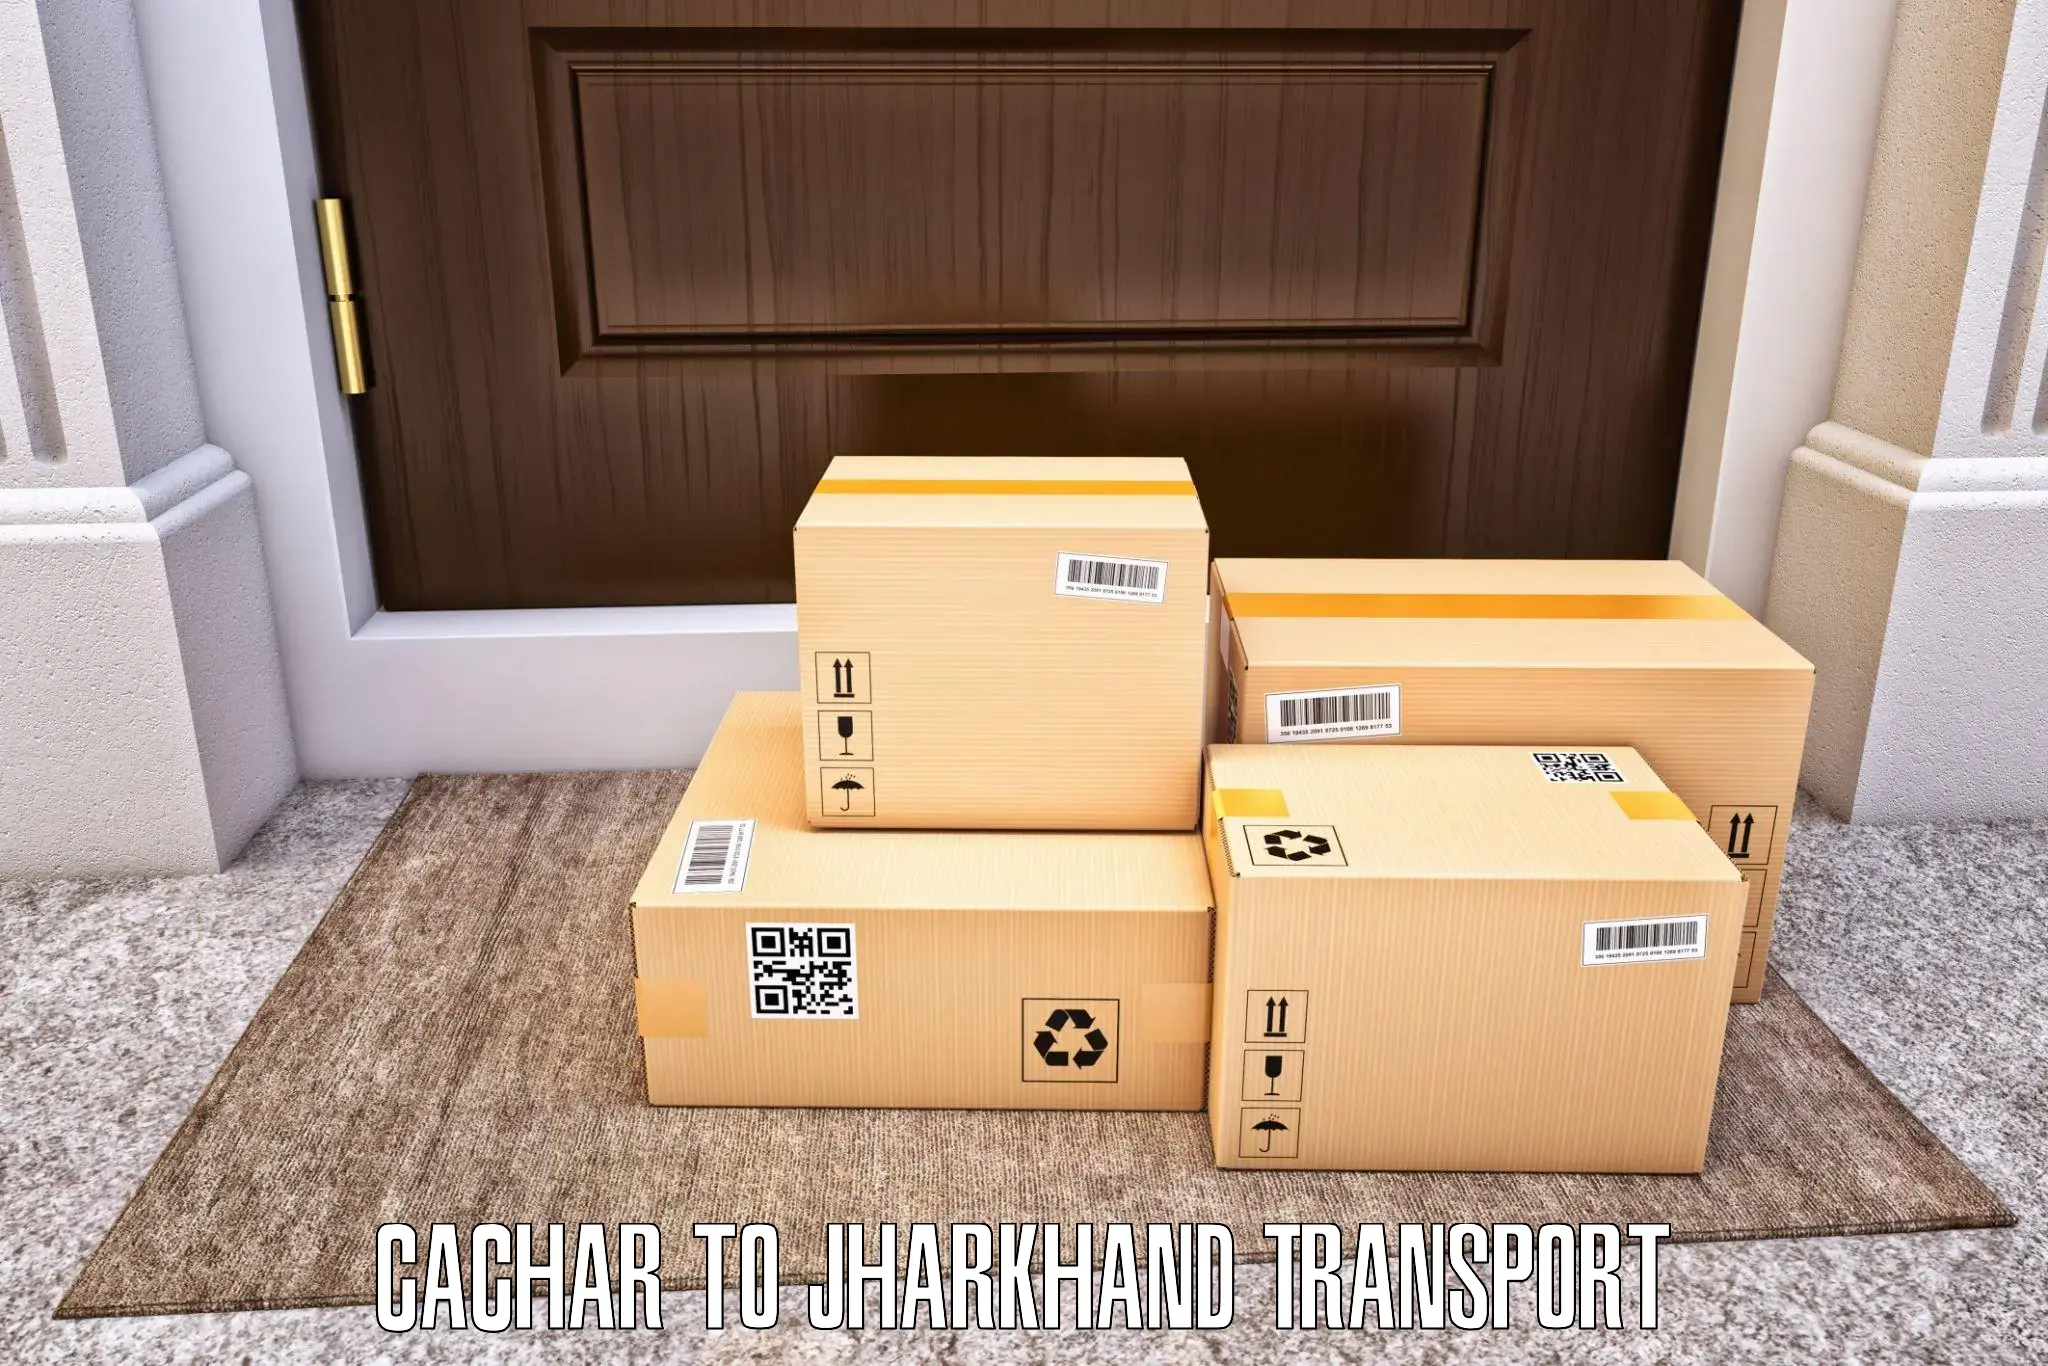 Goods delivery service Cachar to Bokaro